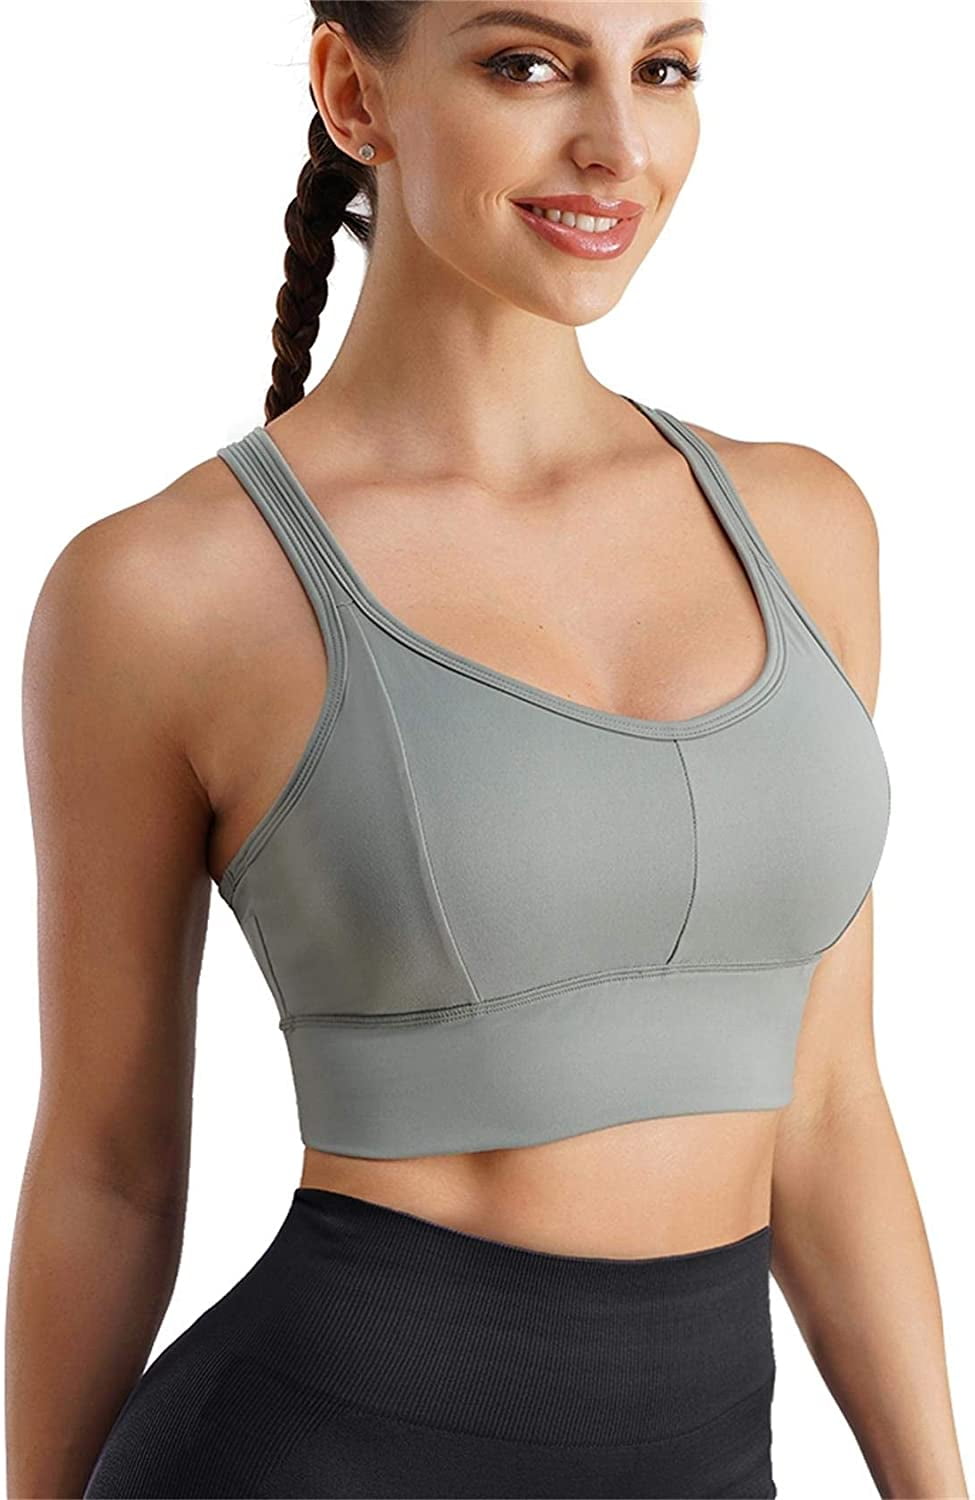 Women Bust Shaping Yoga Athletic Padded High Impact Workout Sports Bra Crop Tank Top